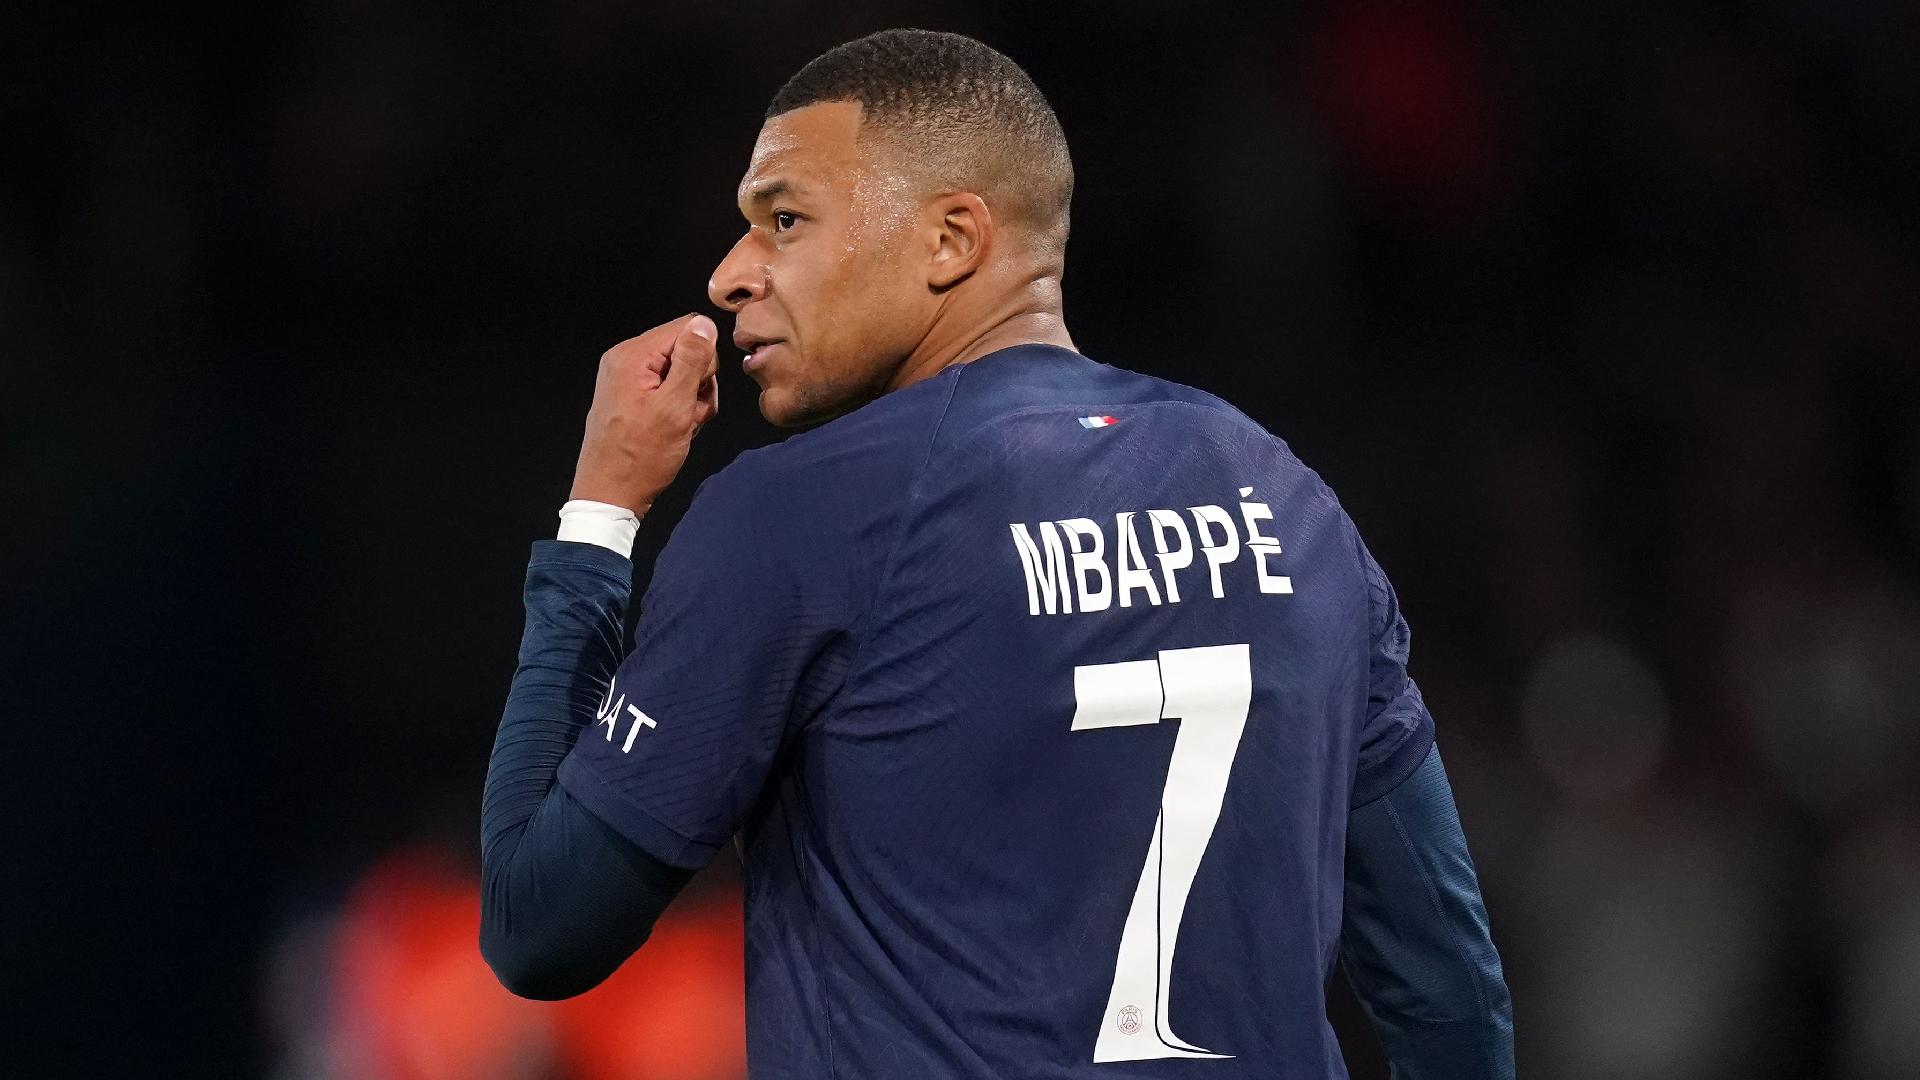 Luis Enrique offers Kylian Mbappe no guarantees of Champions League playing time